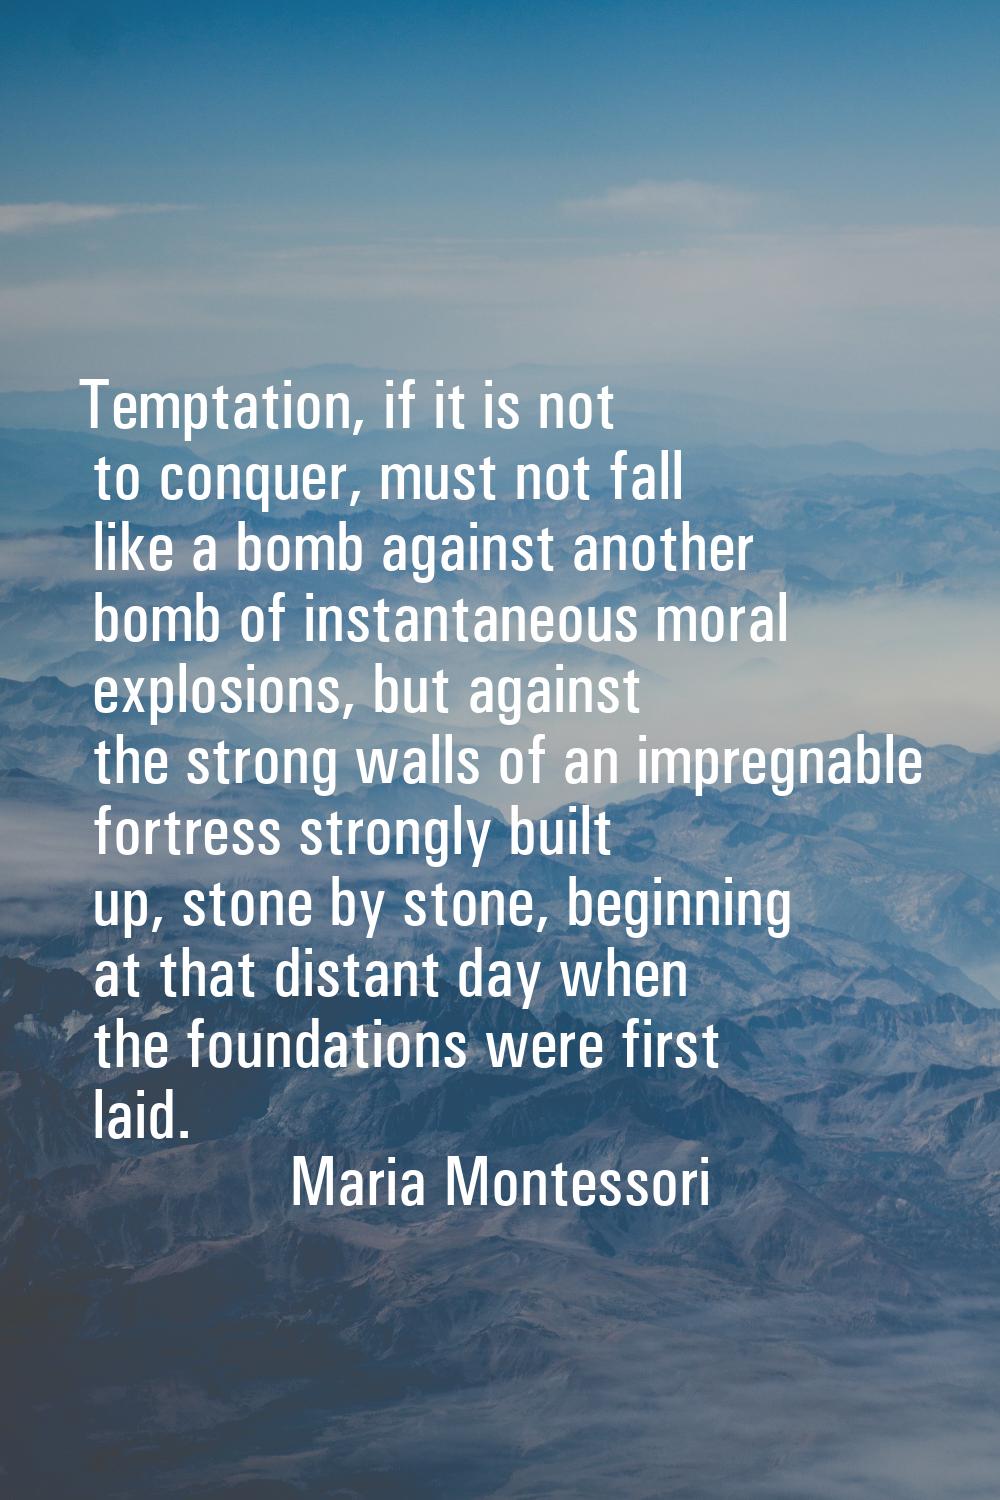 Temptation, if it is not to conquer, must not fall like a bomb against another bomb of instantaneou